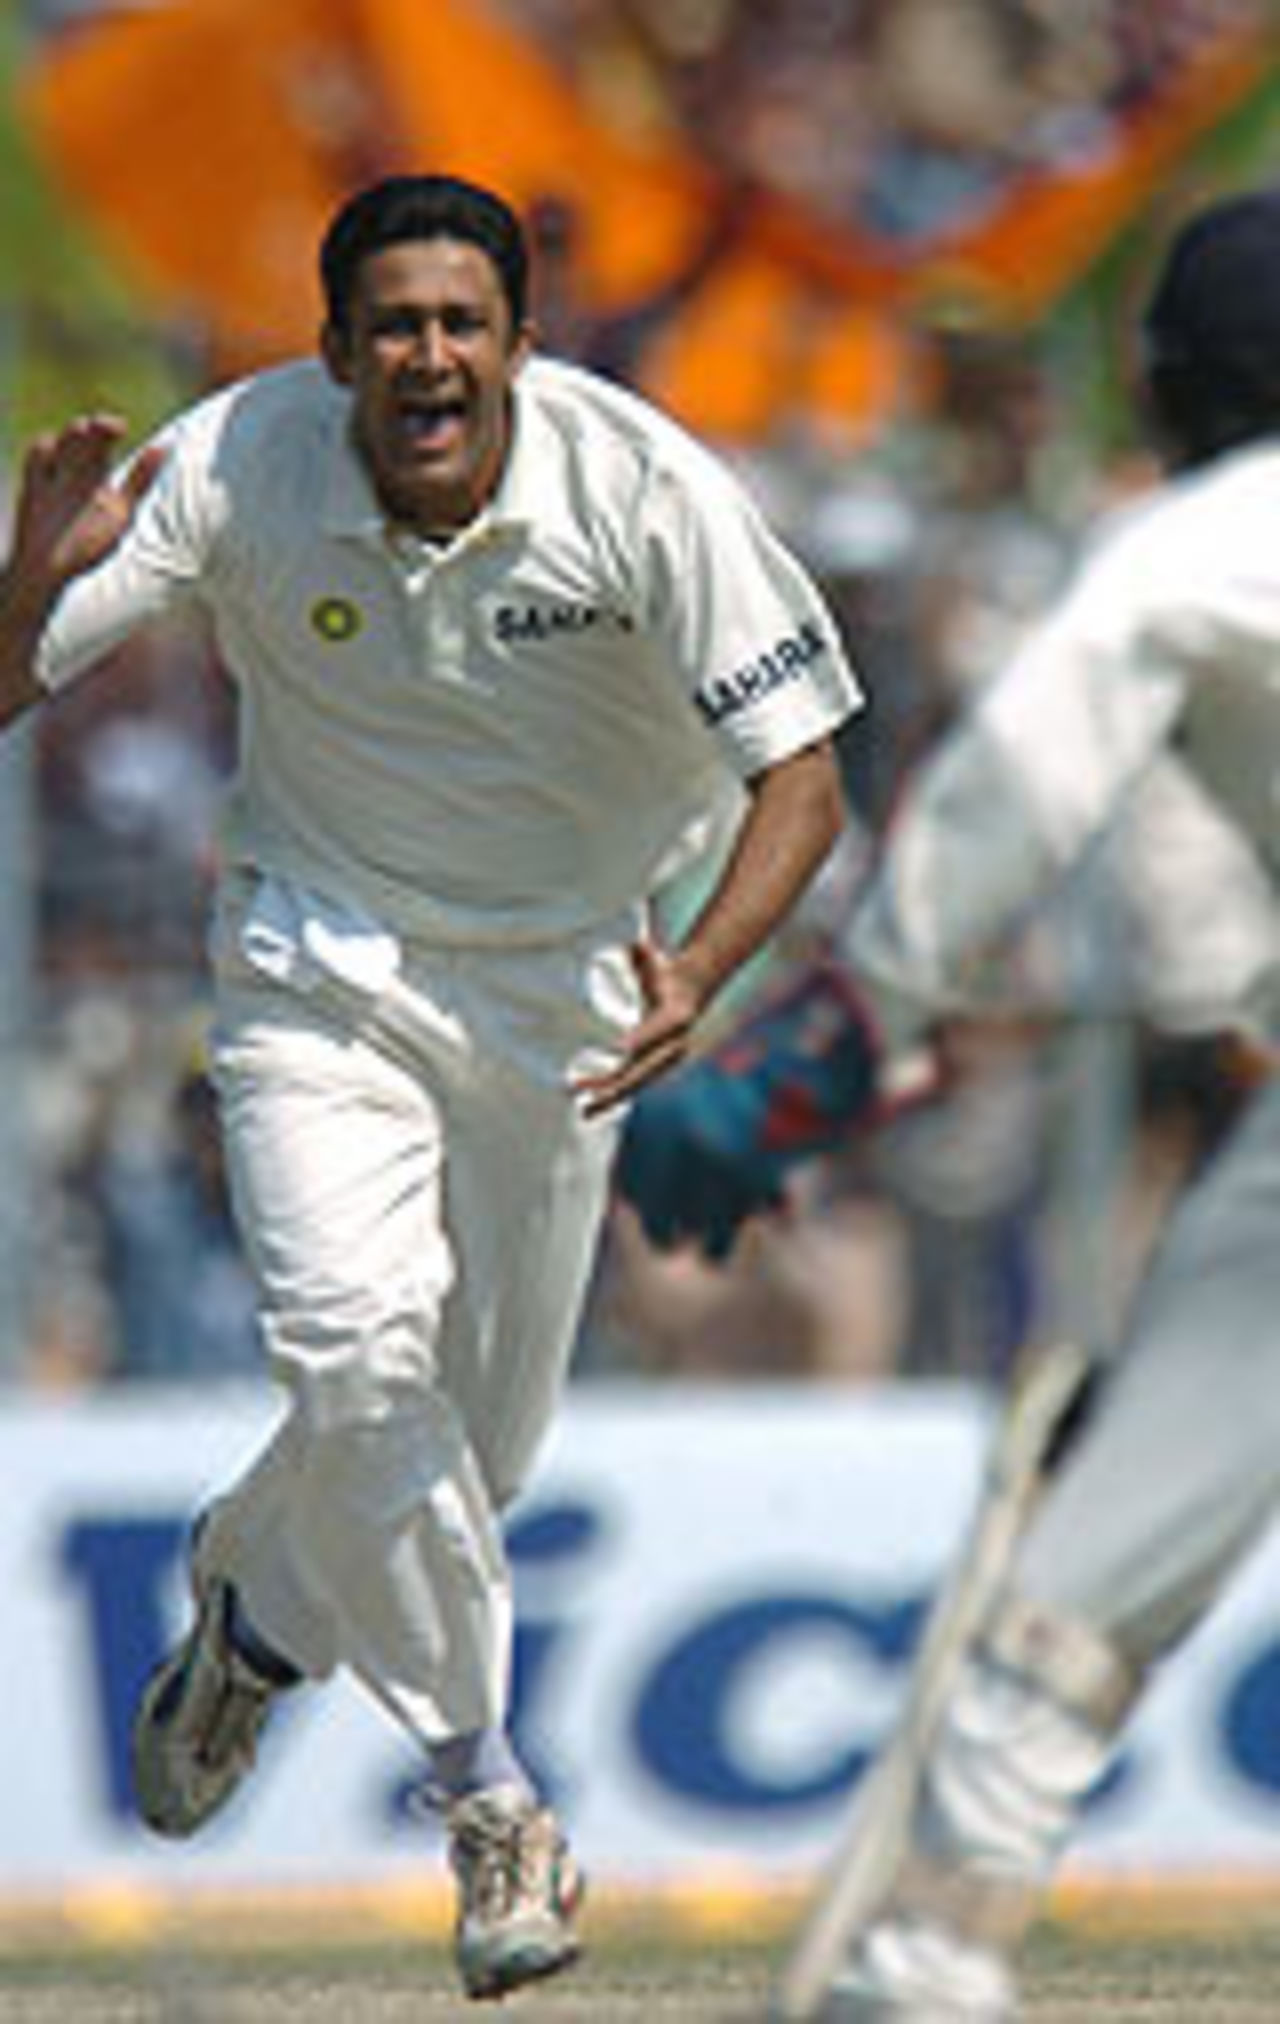 Anil Kumble is ecstatic after picking up a wicket, India v Pakistan, 2nd Test, Kolkata, March 20, 2005